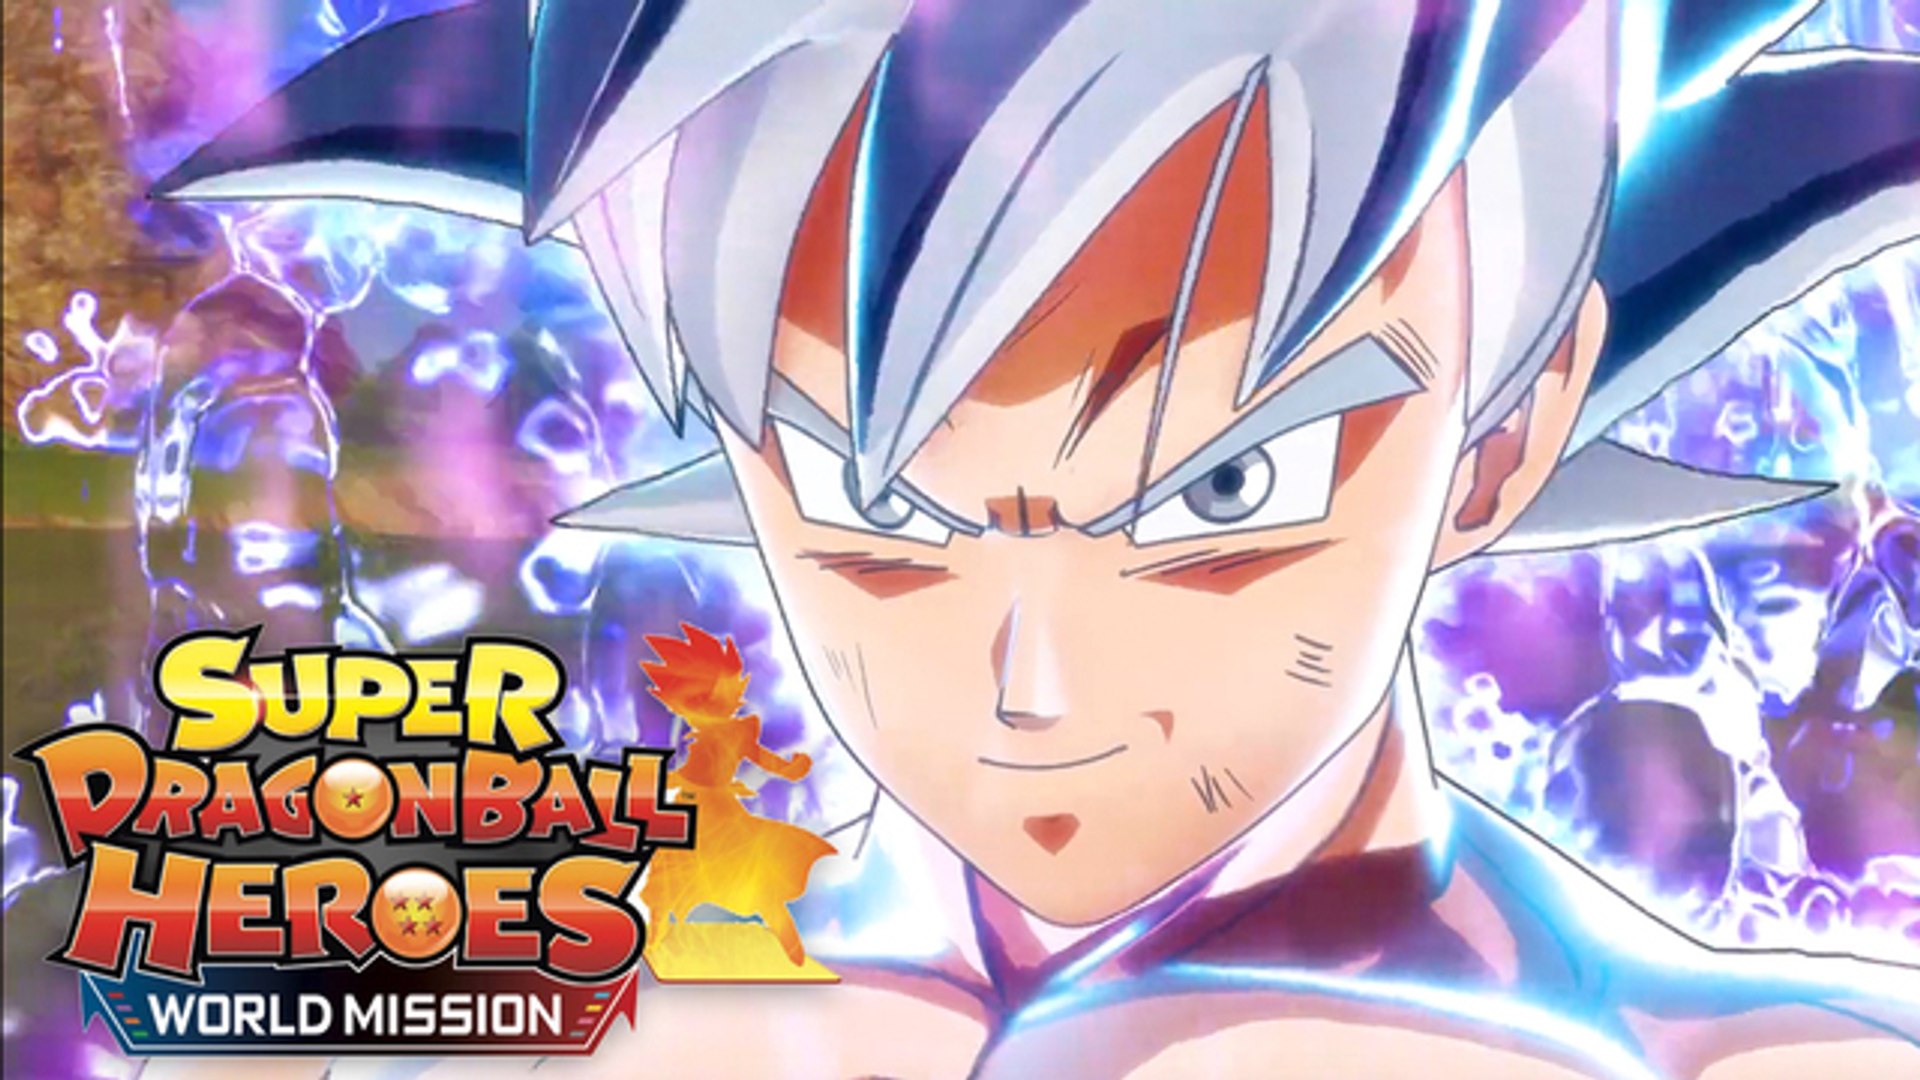 Super Dragon Ball Heroes World Mission Official Announcement